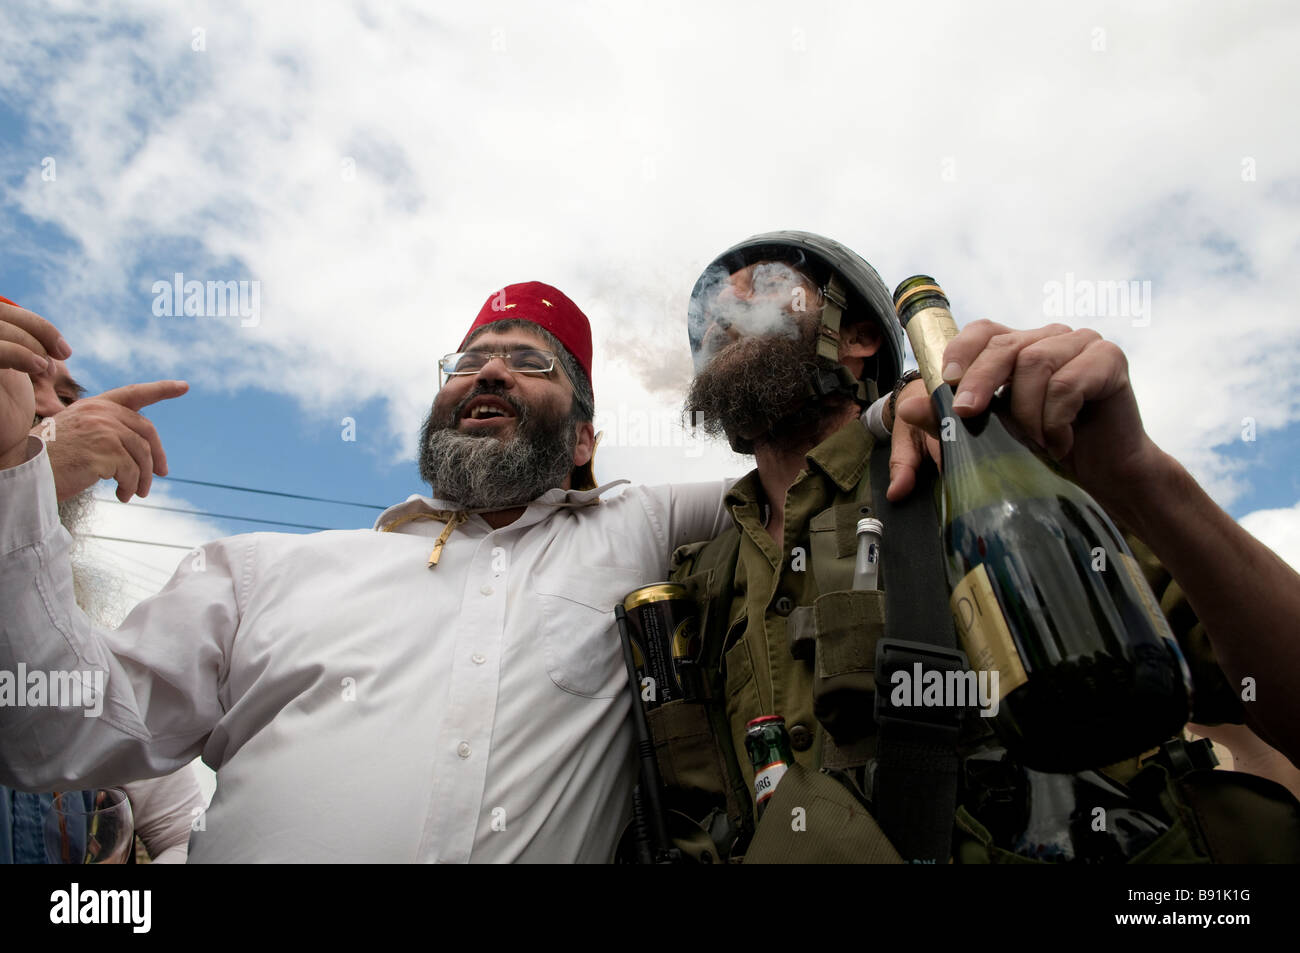 Drunk Jewish settler wearing military costume marks the Jewish holiday of Purim in the divided West Bank town of Hebron Israel Stock Photo